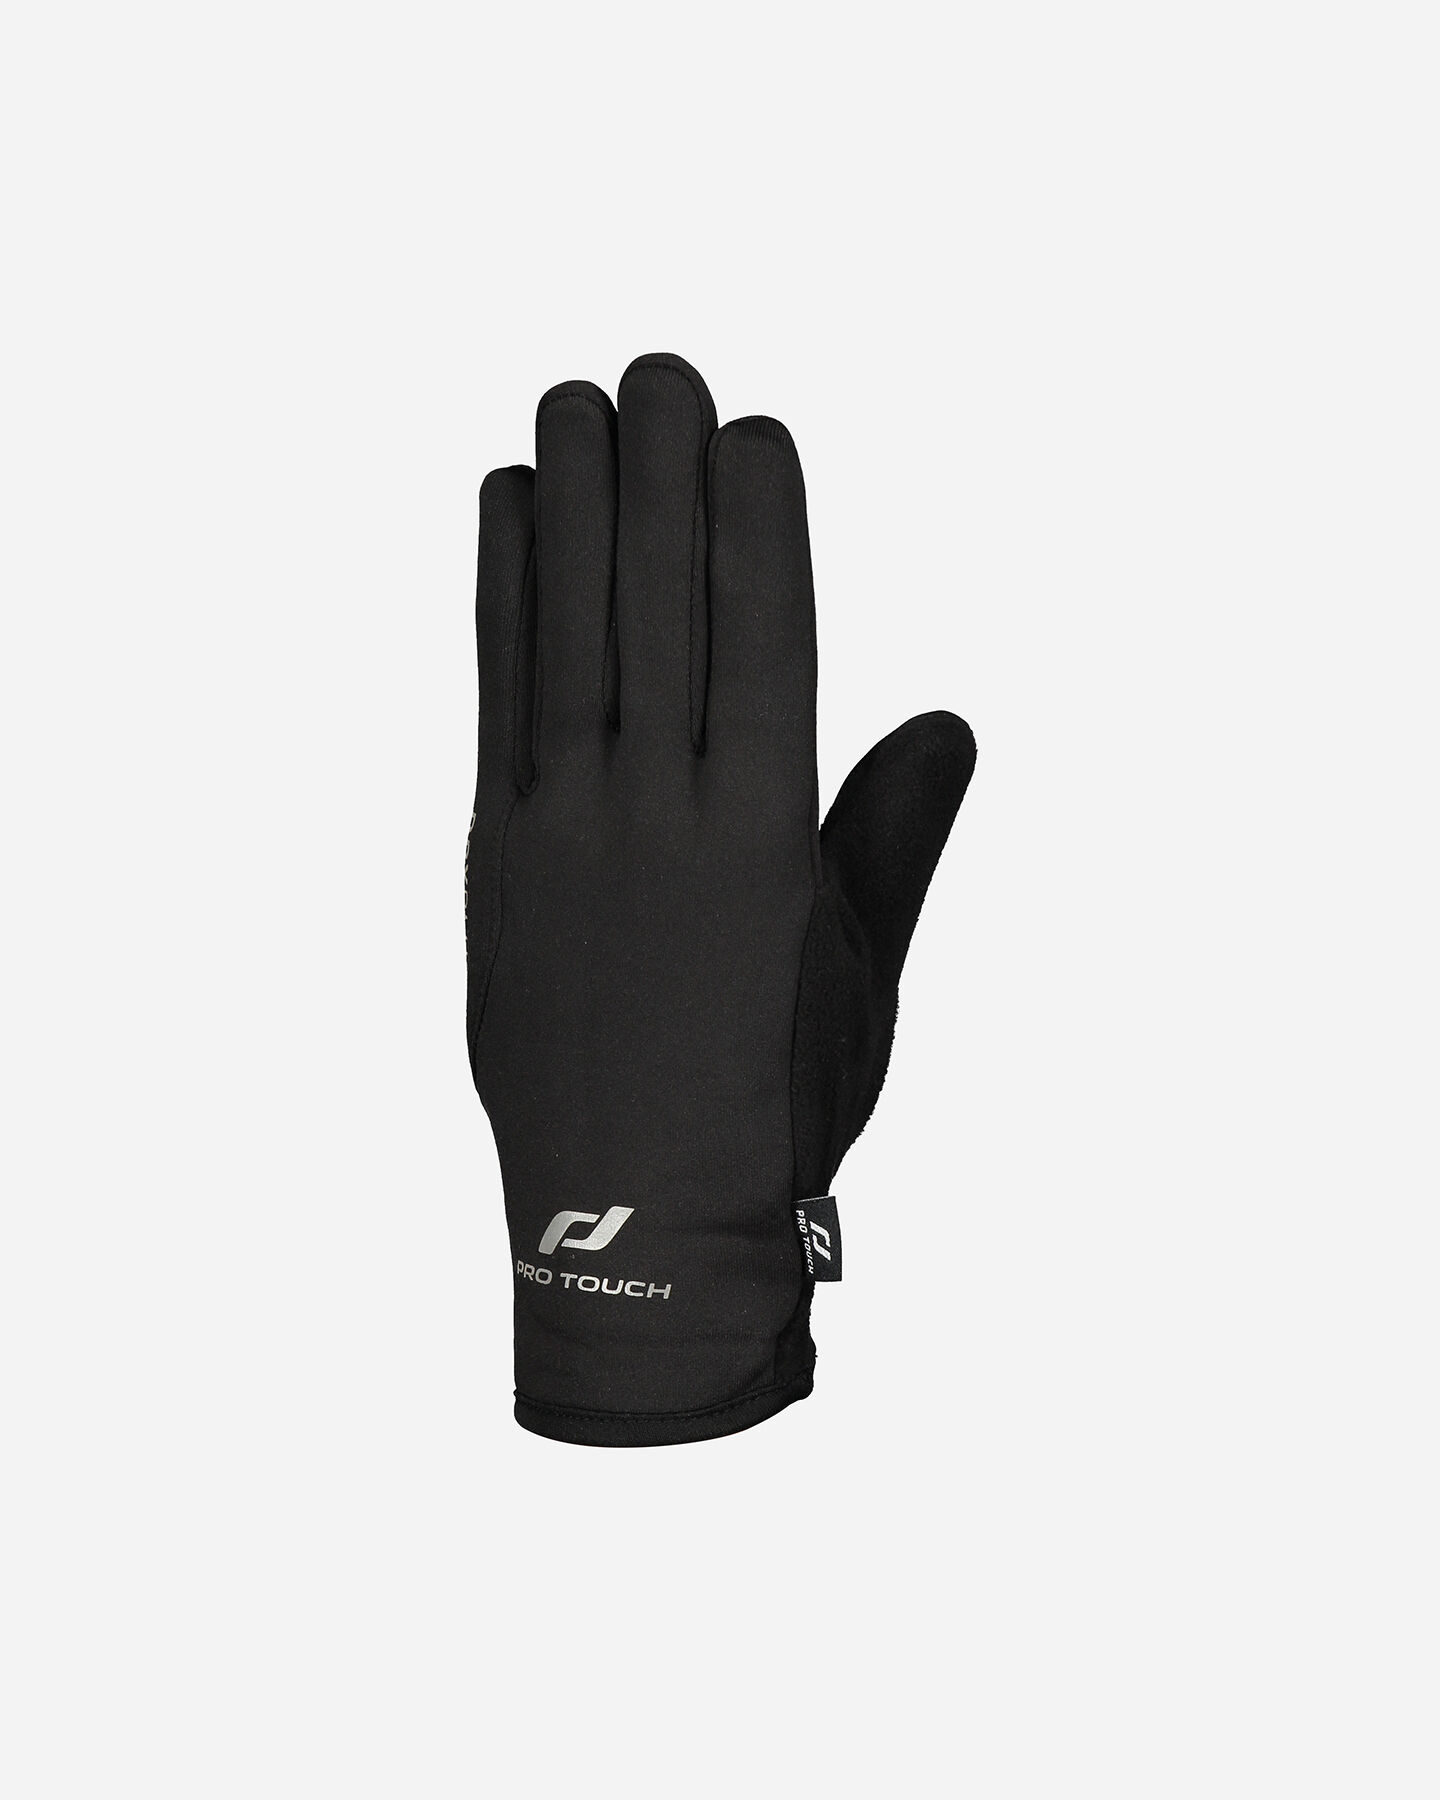  Guanti running PRO TOUCH PRO TOUCH M S5207068|050|L scatto 1